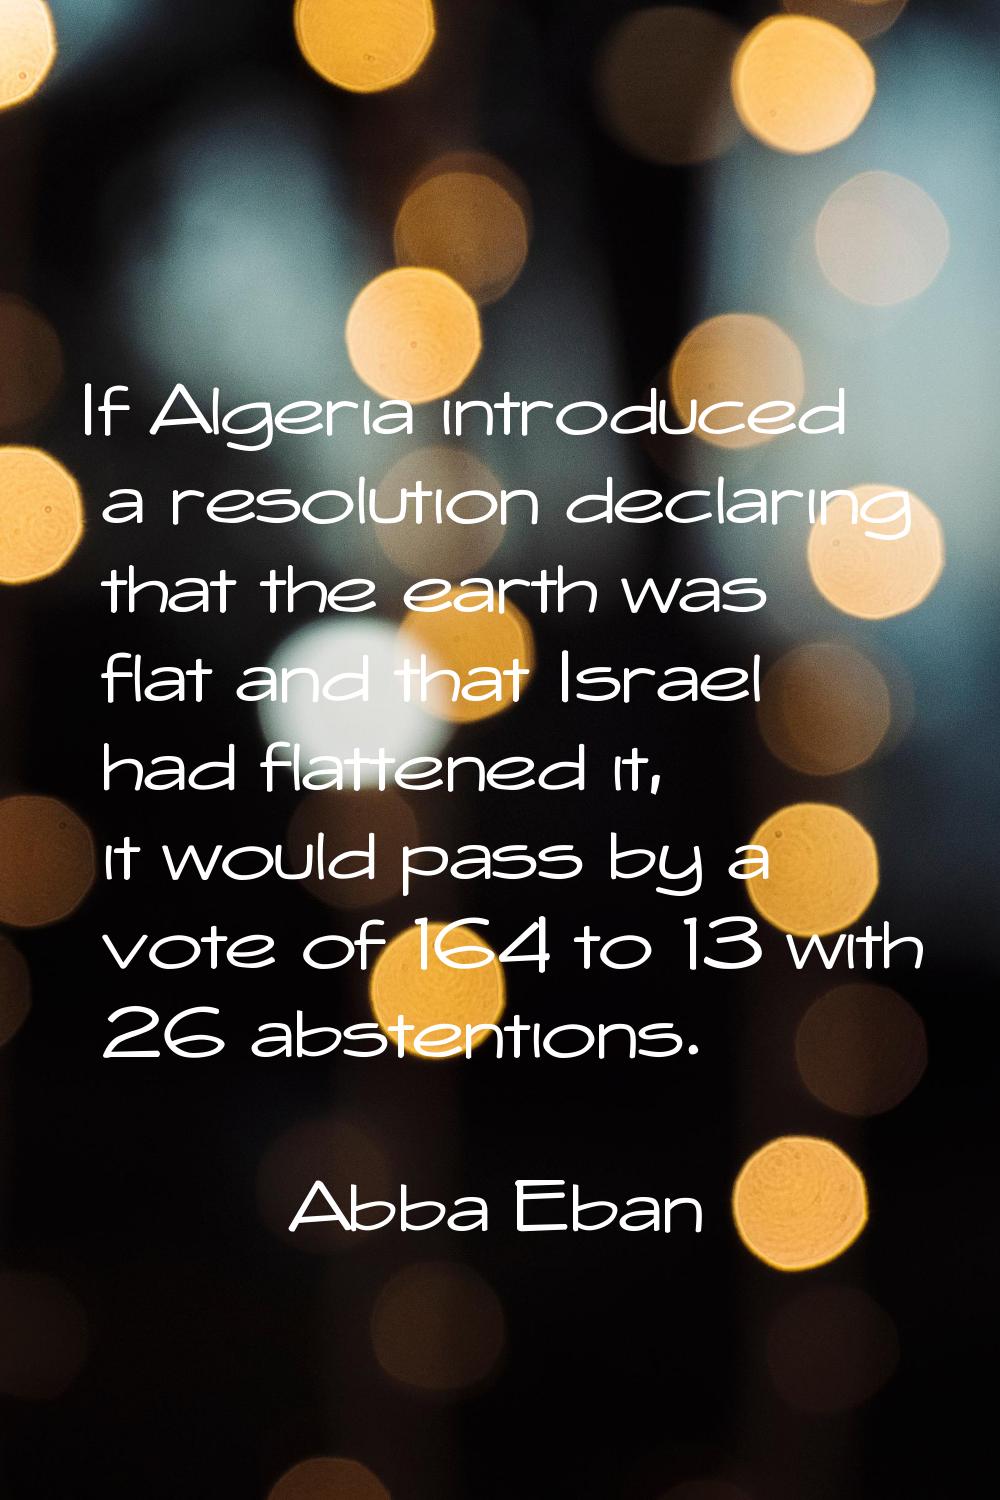 If Algeria introduced a resolution declaring that the earth was flat and that Israel had flattened 